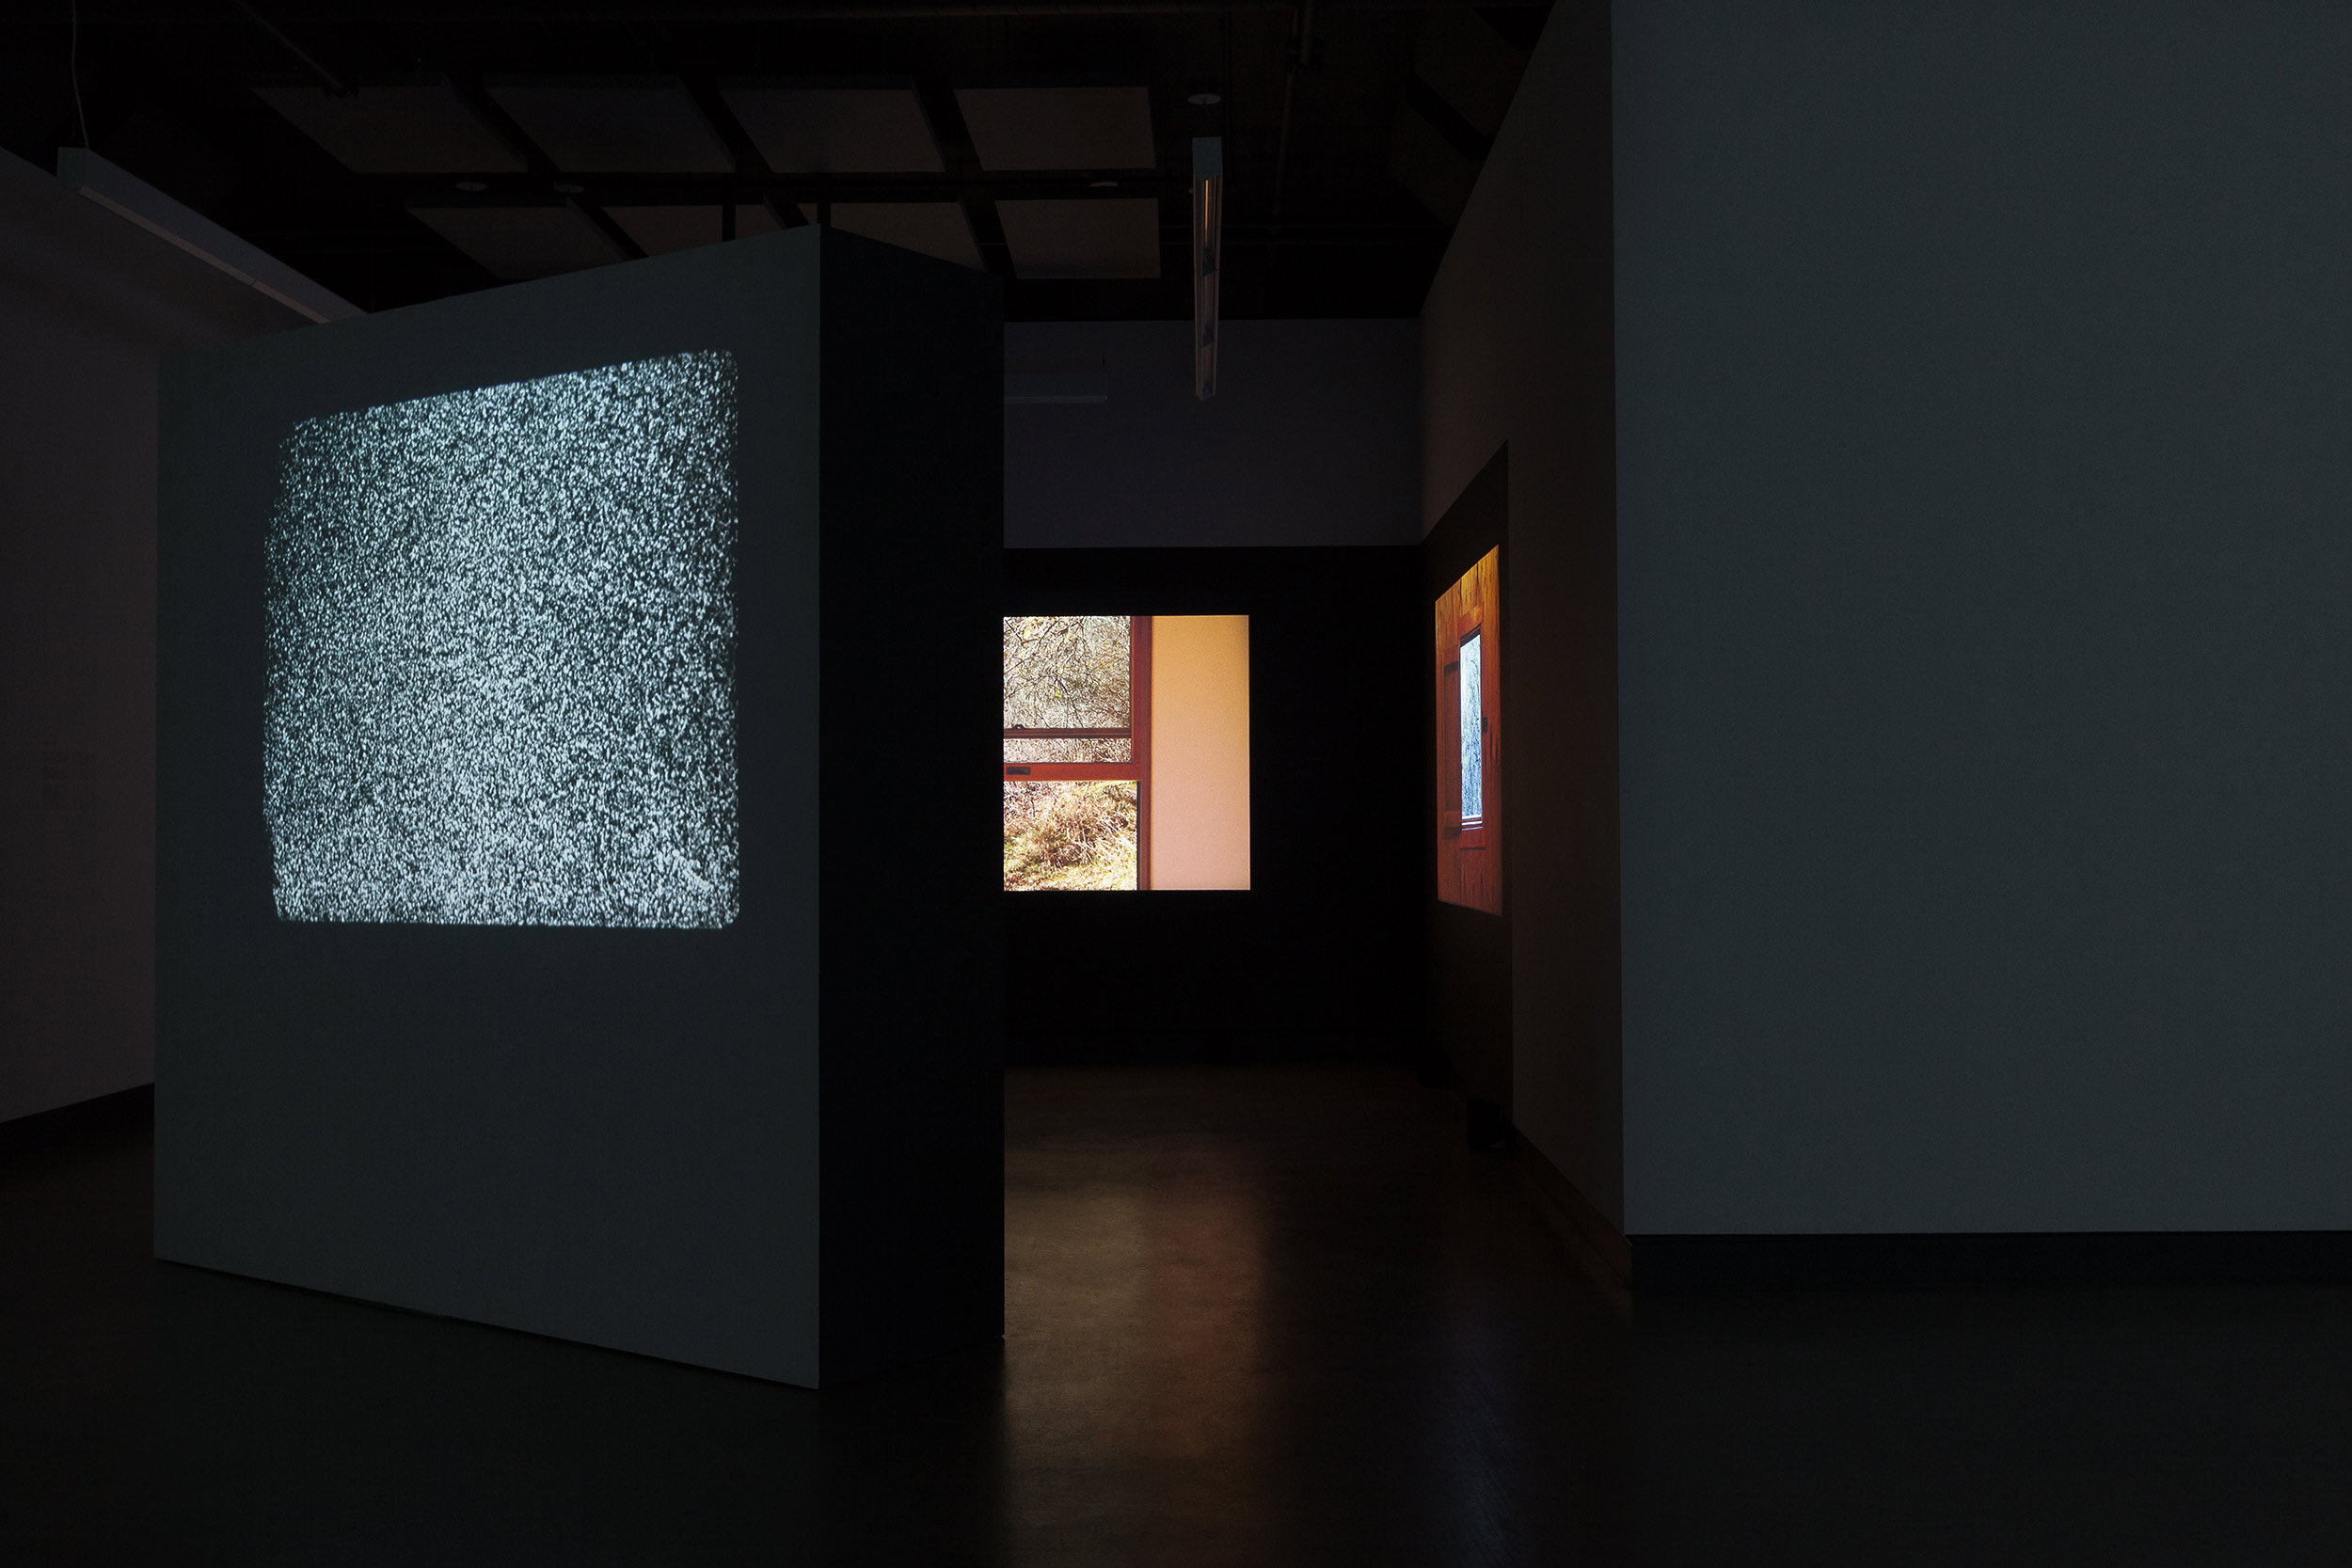  © Installation view of the exhibition, Dazibao, 2018. From left to right: Miriam Sampaio, James Benning. Photo: Marilou Crispin. 